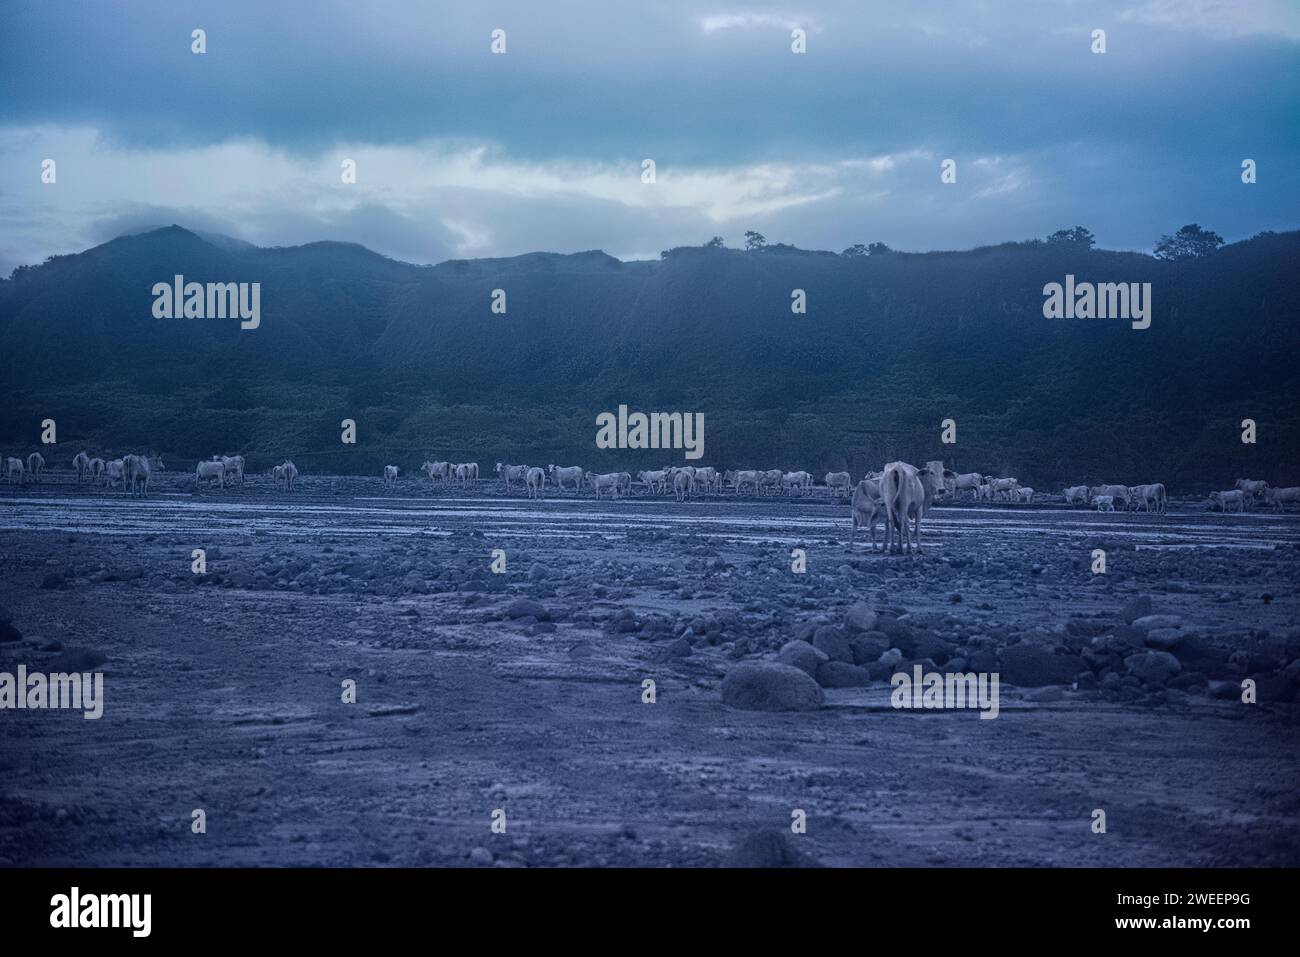 Herds of cattle at Mount Pinatubo, Zambales, Luzon, Philippines Stock Photo